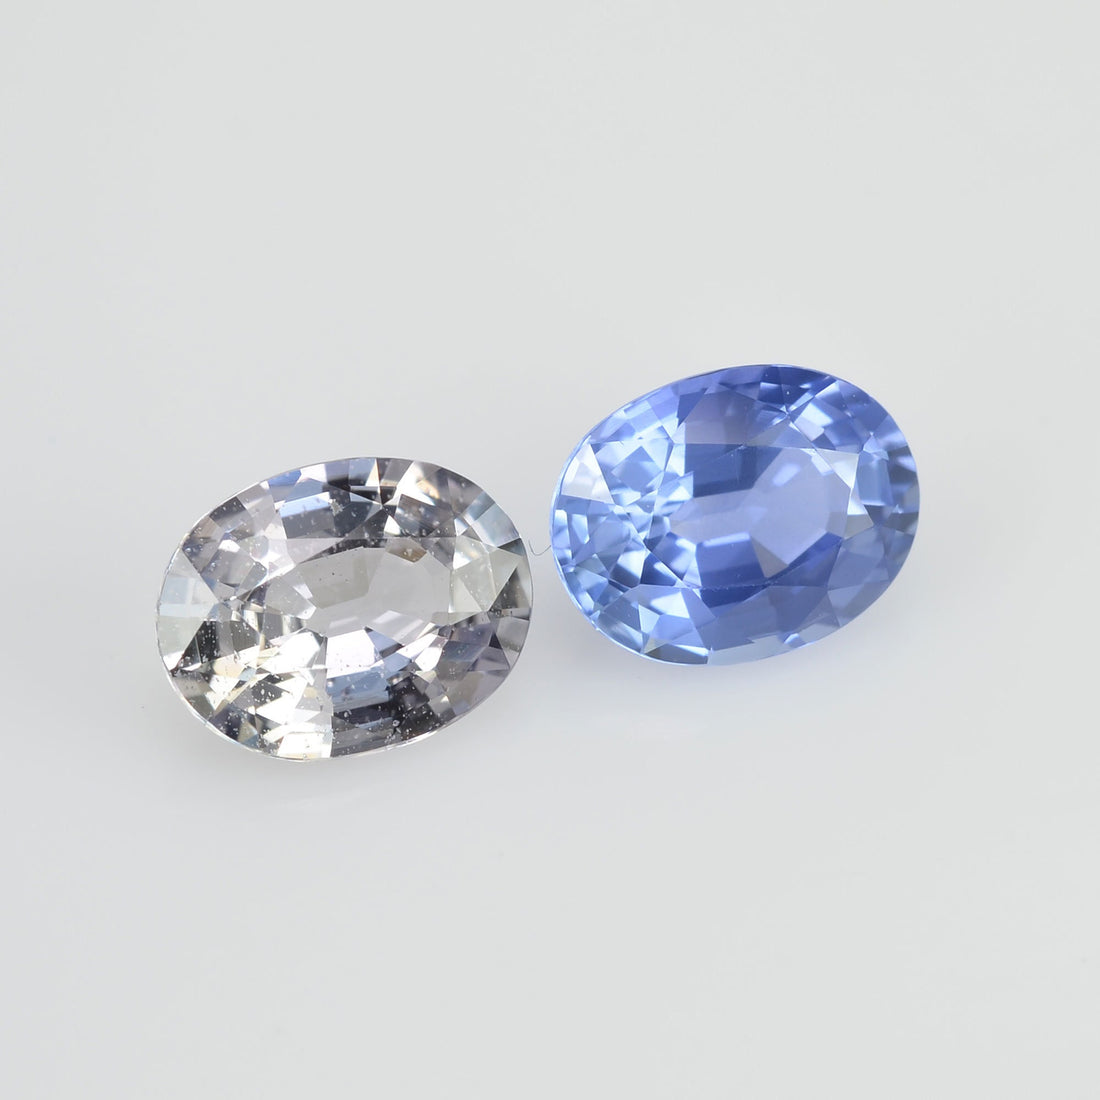 2.72 cts Natural Fancy Sapphire Loose Pair Gemstone Oval Cut